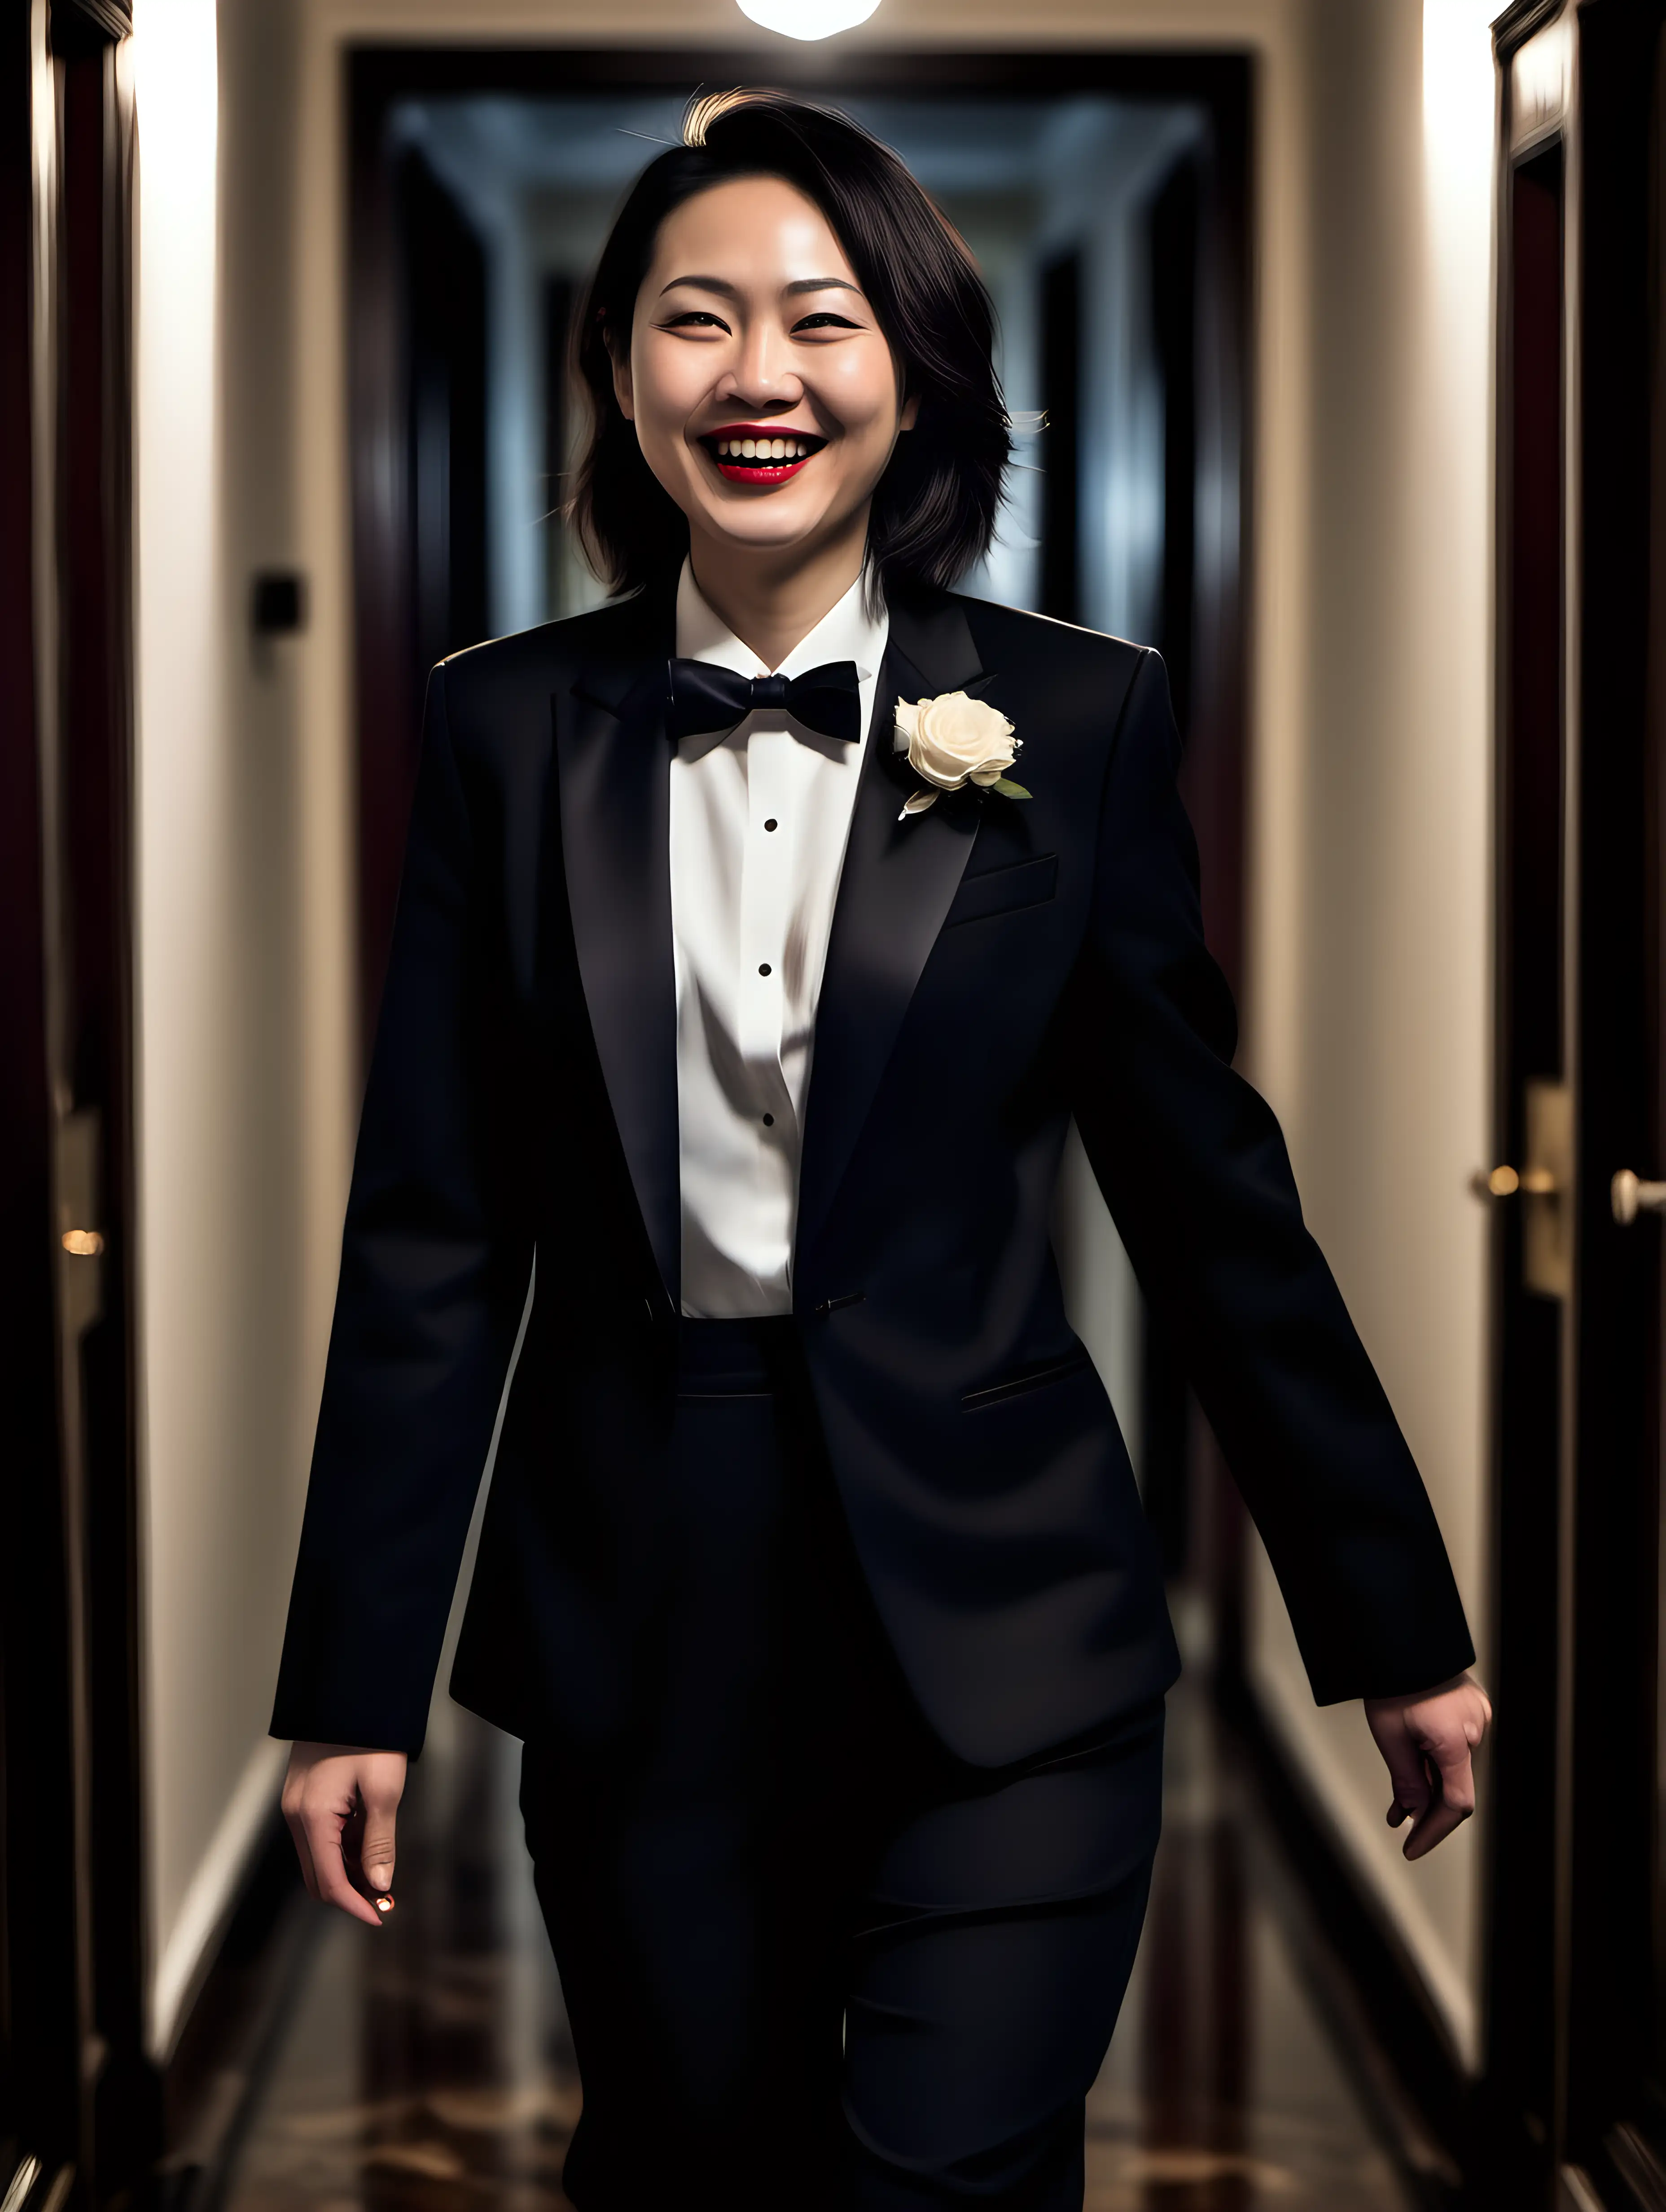 It is night. A smiling 40 year old Chinese woman with shoulder length hair and lipstick is walking down a dark hallway in a mansion. She is facing forward. She is wearing a tuxedo with a black jacket with a corsage and a white shirt and a black bowtie and black cufflinks and black pants. She is relaxed. Her jacket is open. She is smiling and laughing. She is relaxed. Her jacket is open. She is smiling and laughing.